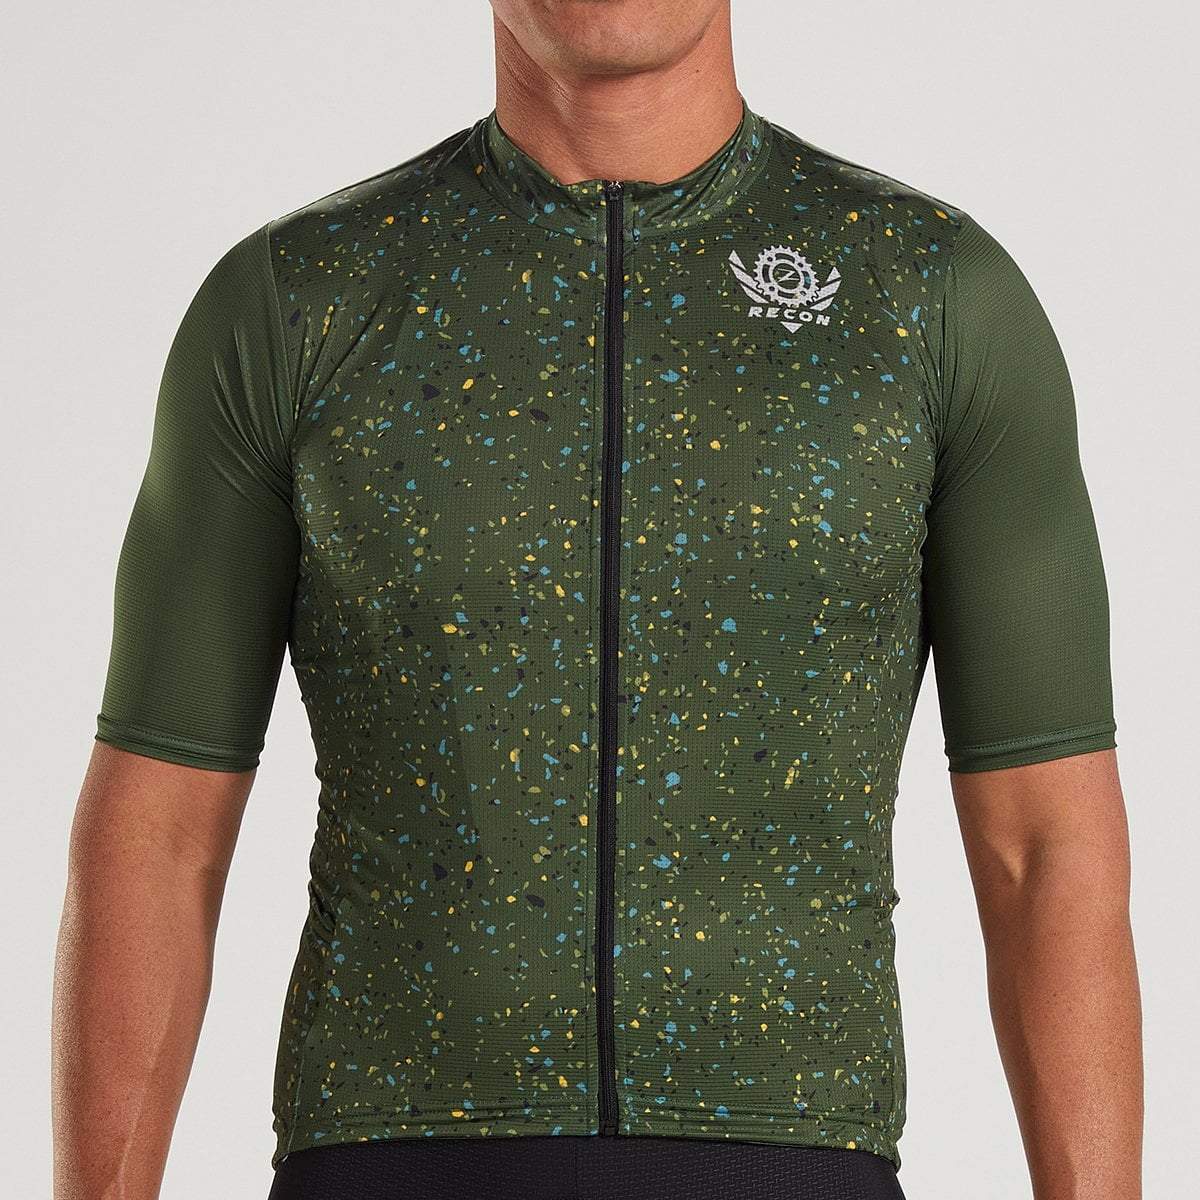 Zoot Sports CYCLE APPAREL MENS RECON CYCLE JERSEY - SPRUCE